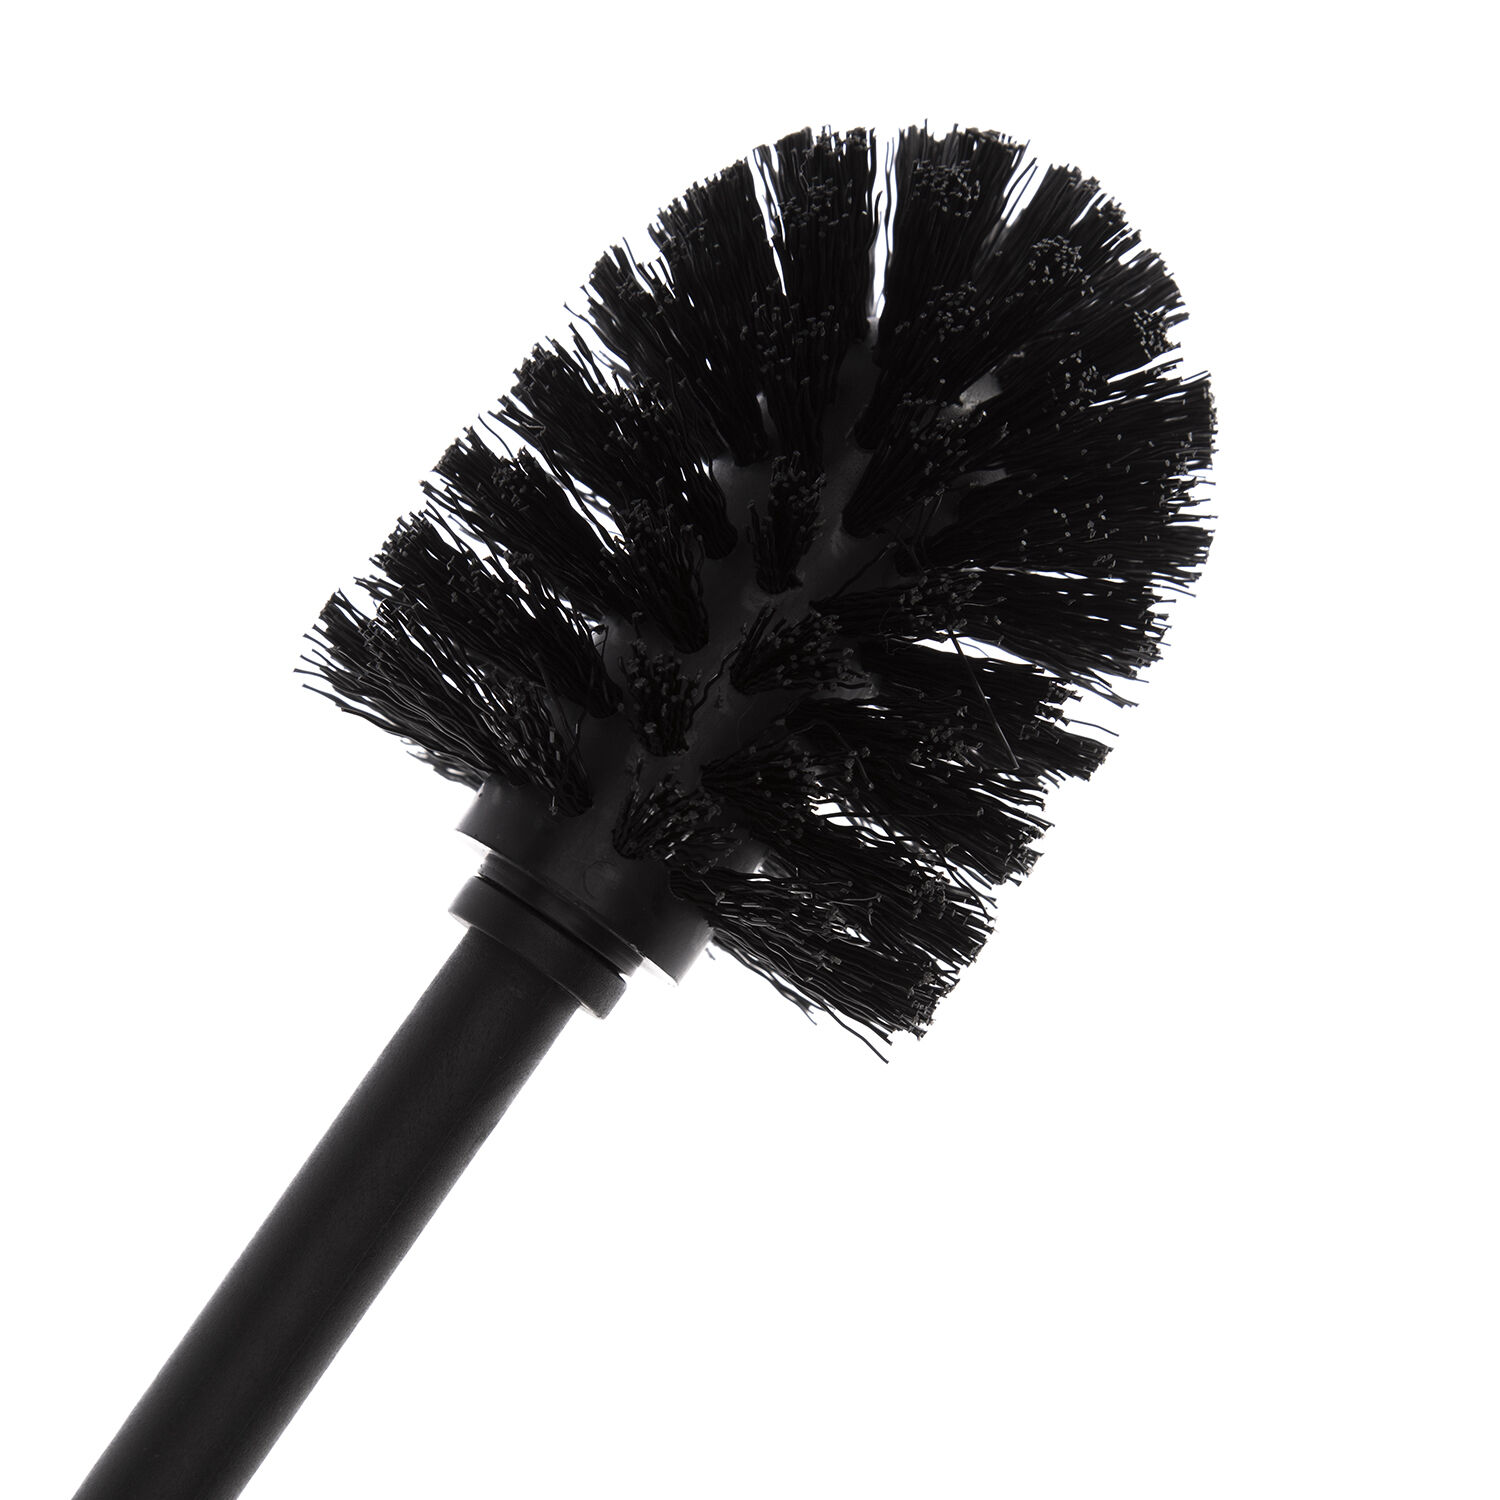 Spiral Embossed Toilet Brush - Charcoal